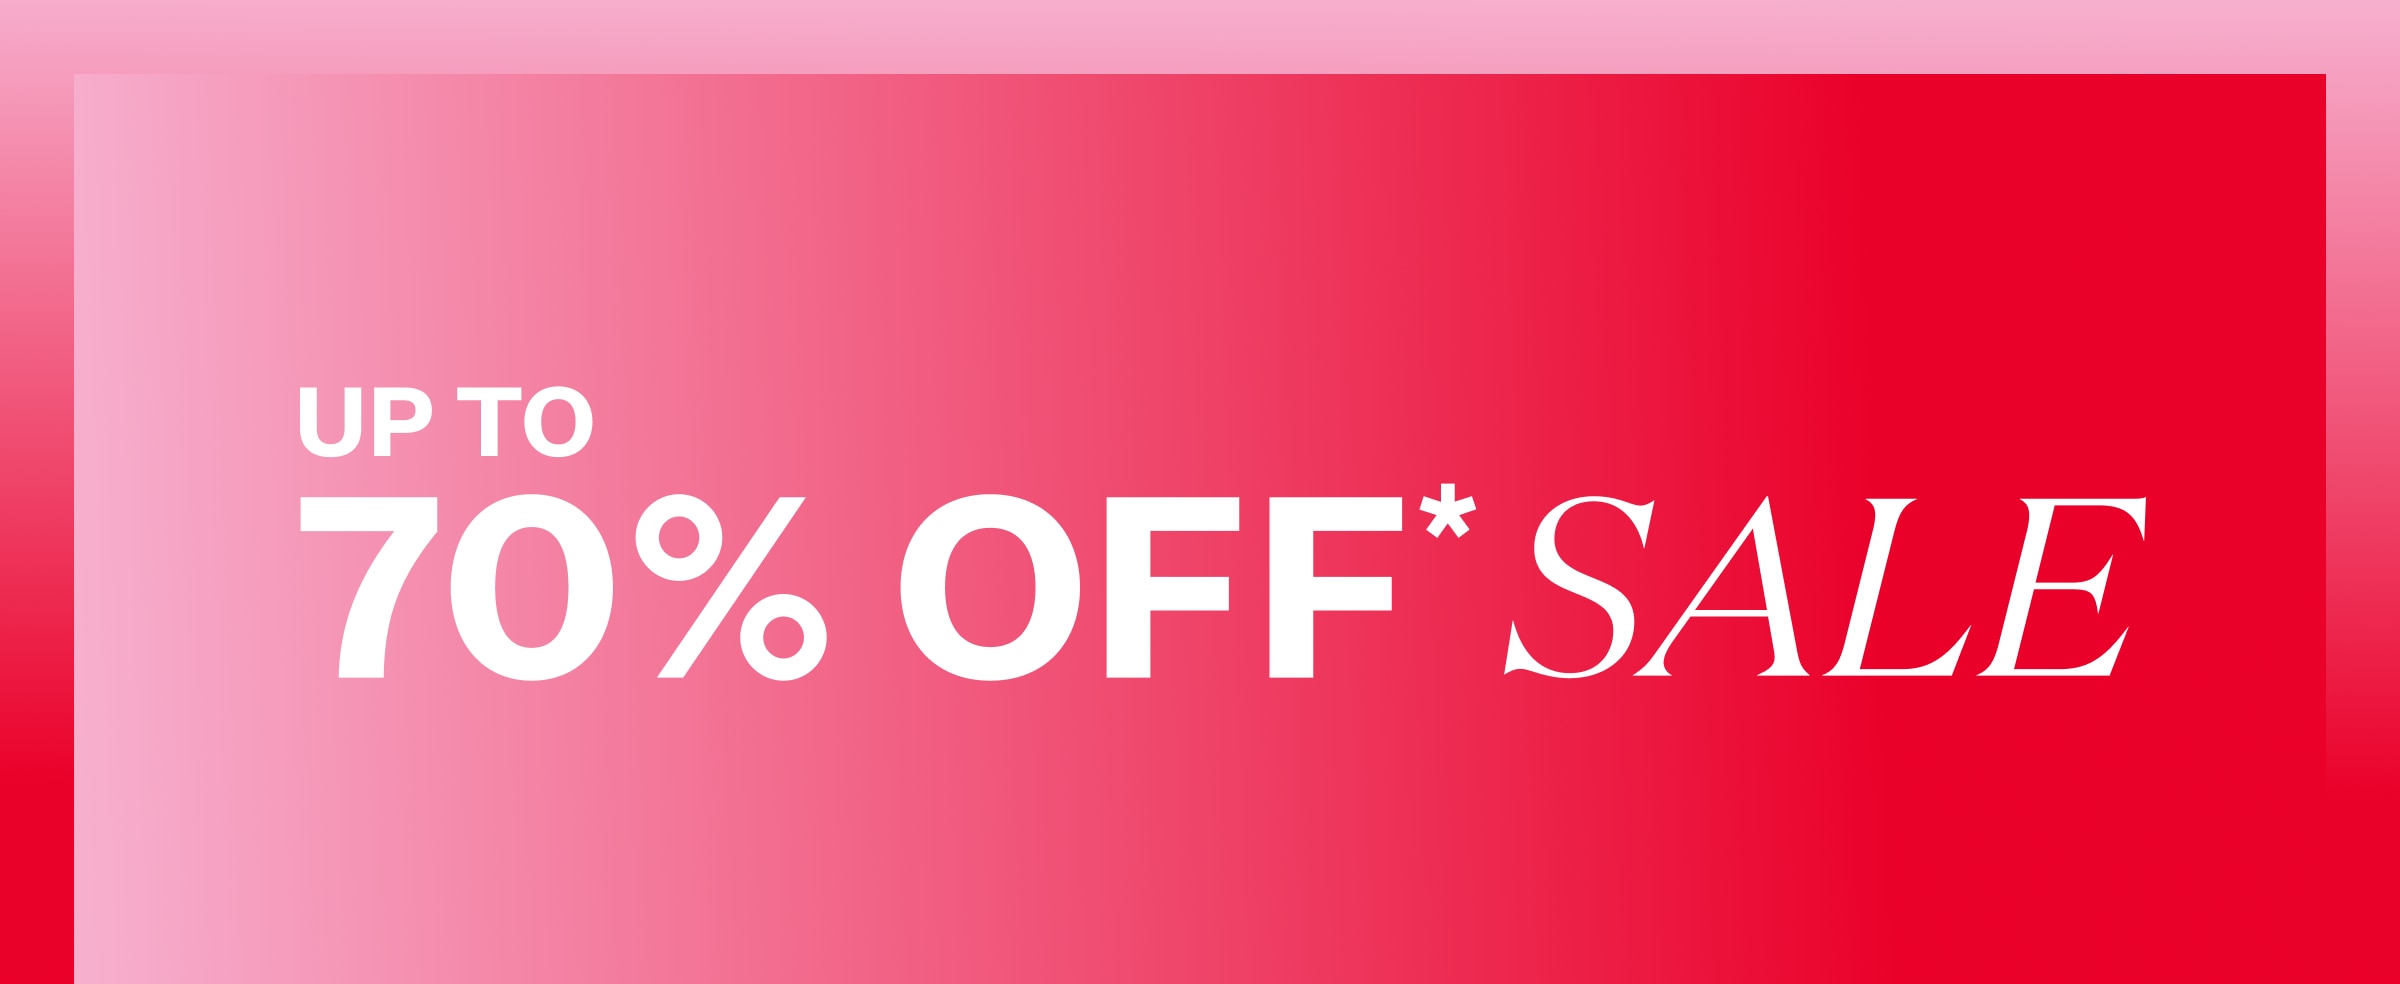 Up To 70% OFF Sale*